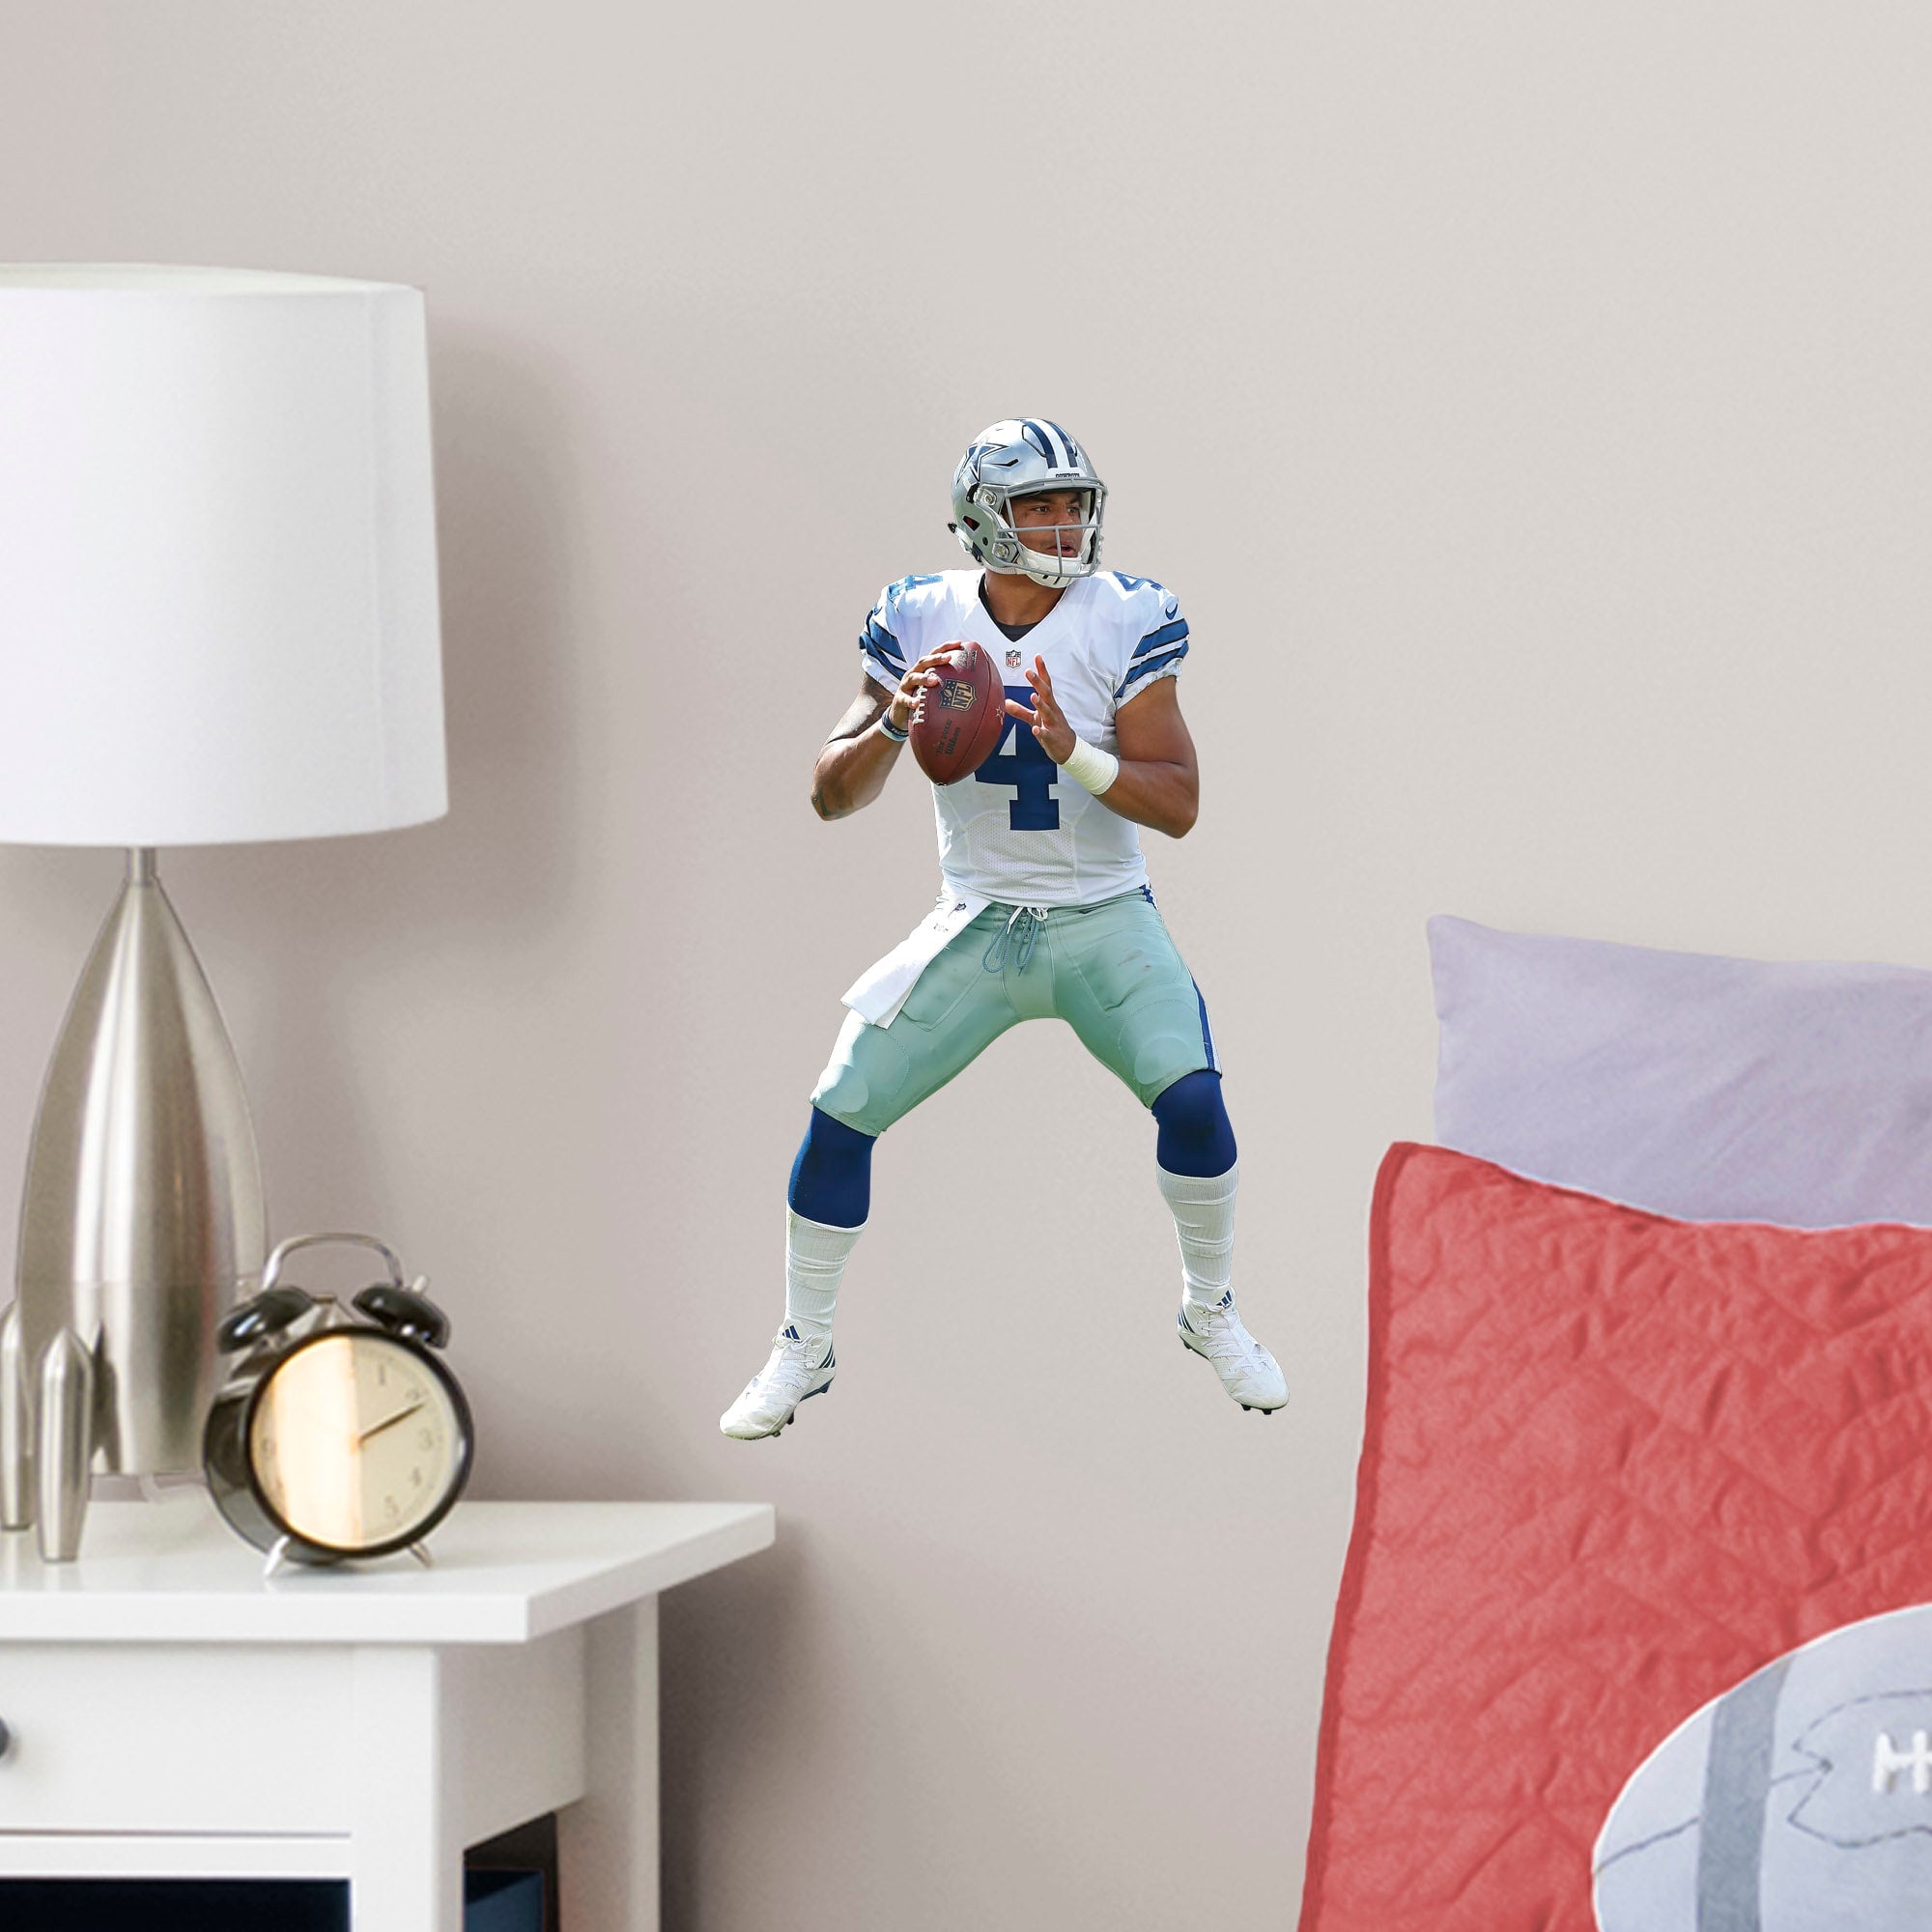 Dak Prescott for Dallas Cowboys - Officially Licensed NFL Removable Wall Decal Large by Fathead | Vinyl